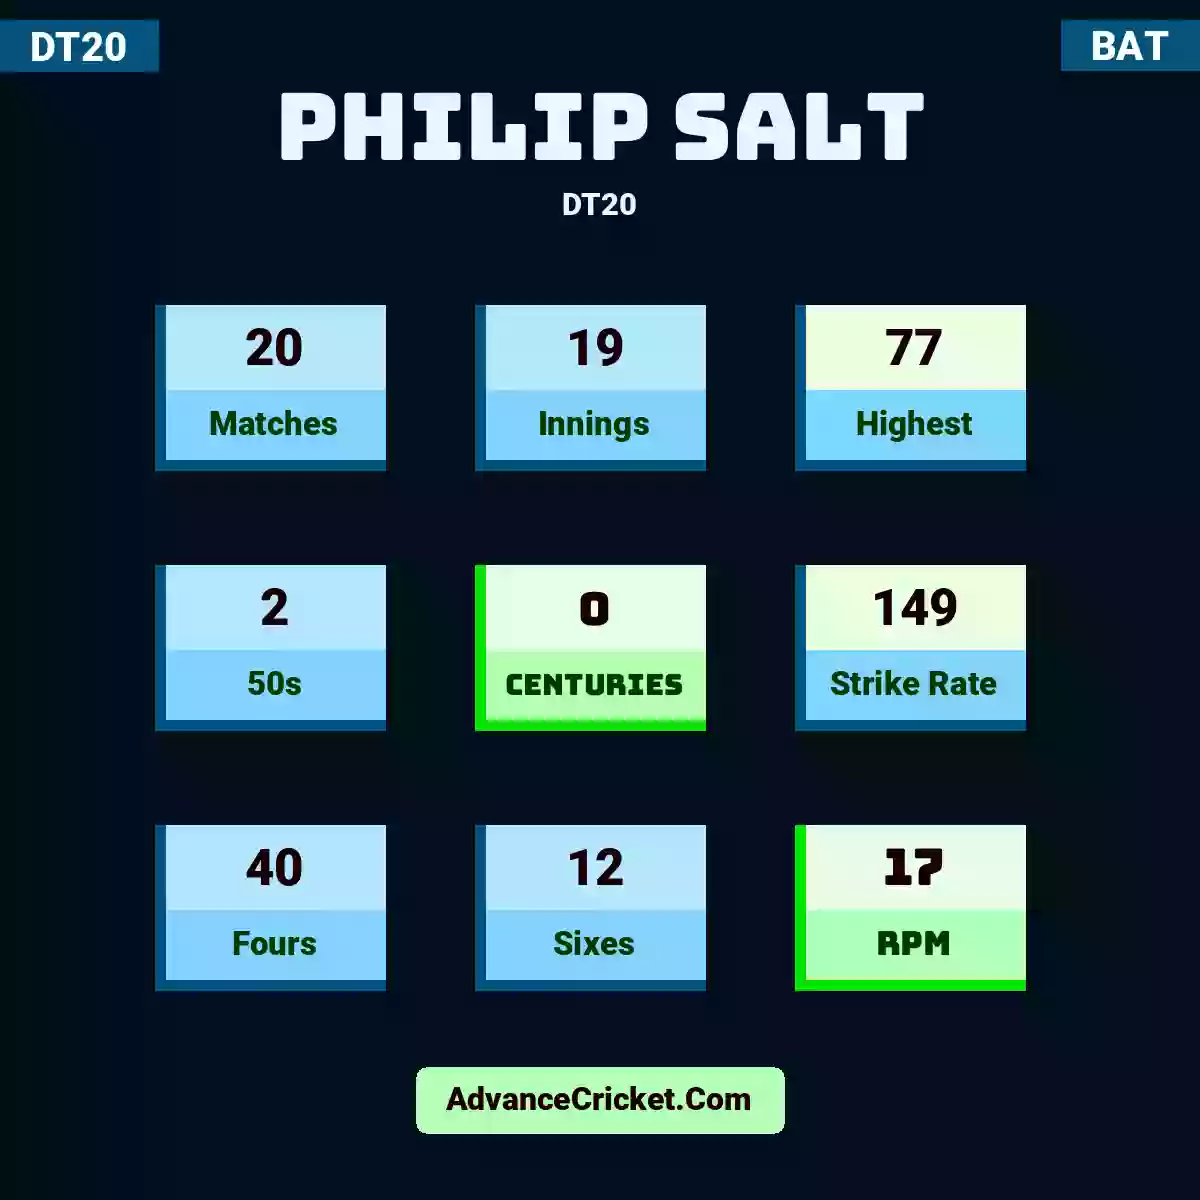 Philip Salt DT20 , Philip Salt played 20 matches, scored 77 runs as highest, 2 half-centuries, and 0 centuries, with a strike rate of 149. P.Salt hit 40 fours and 12 sixes, with an RPM of 17.